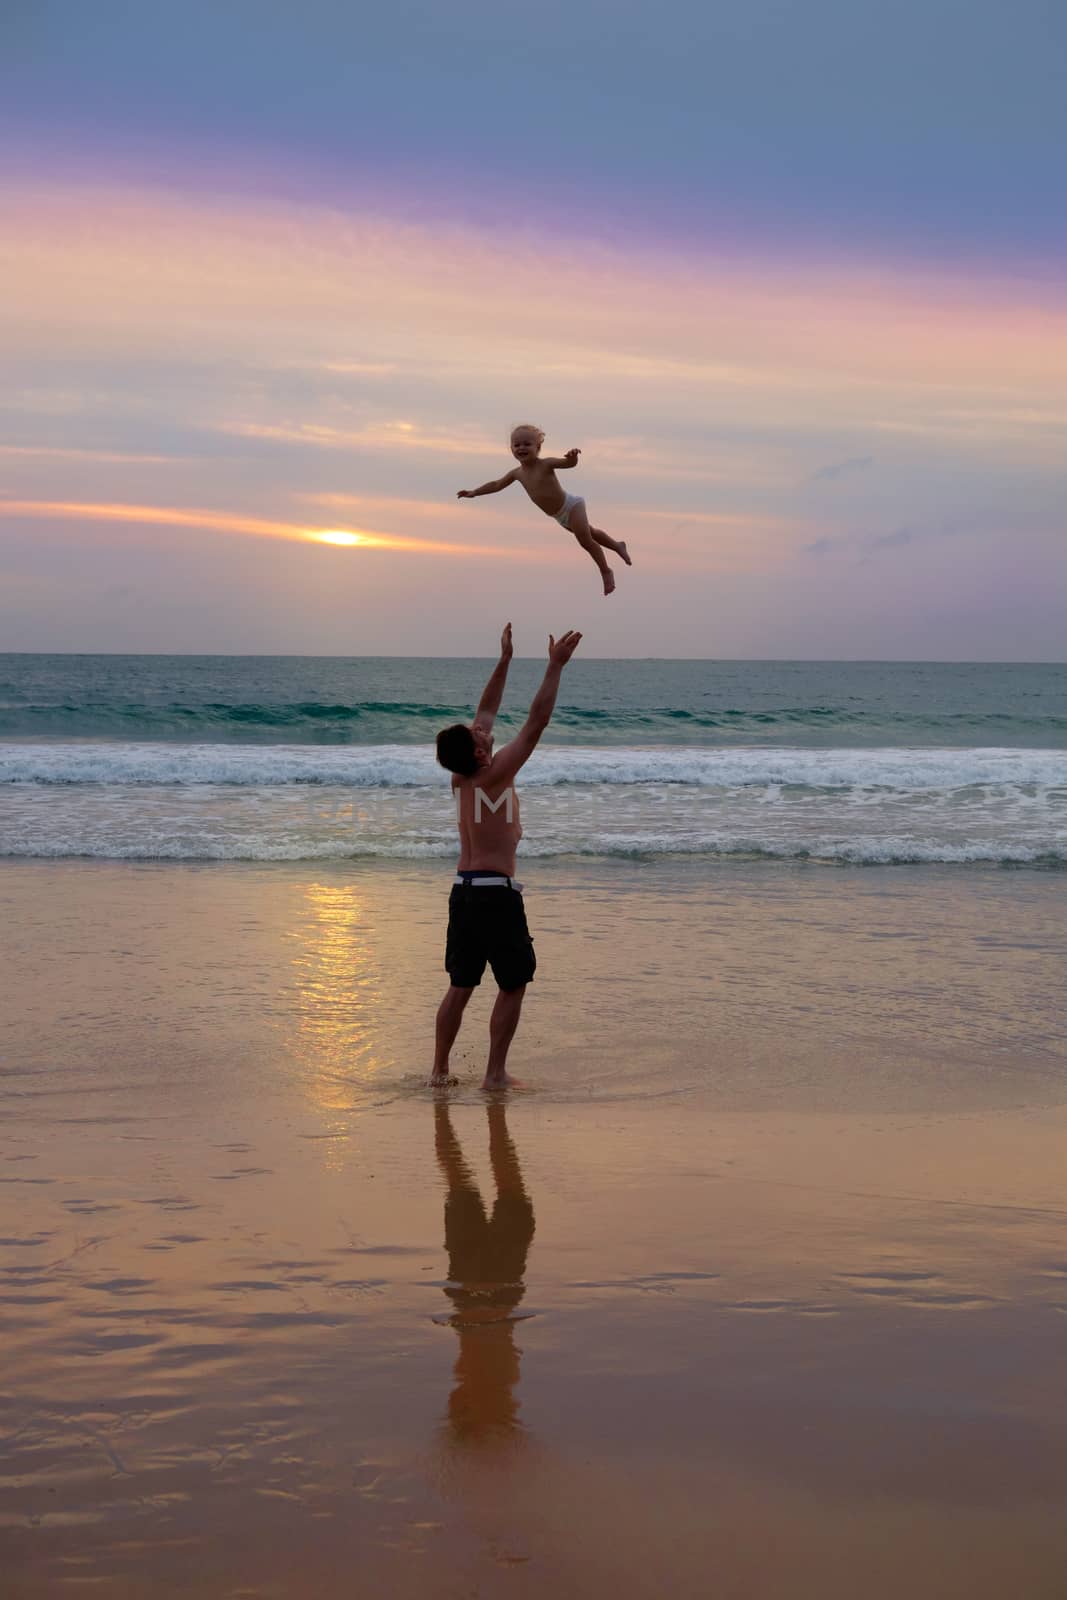 Father throws his daugter at the beach near the sea at the spect by rainfallsup